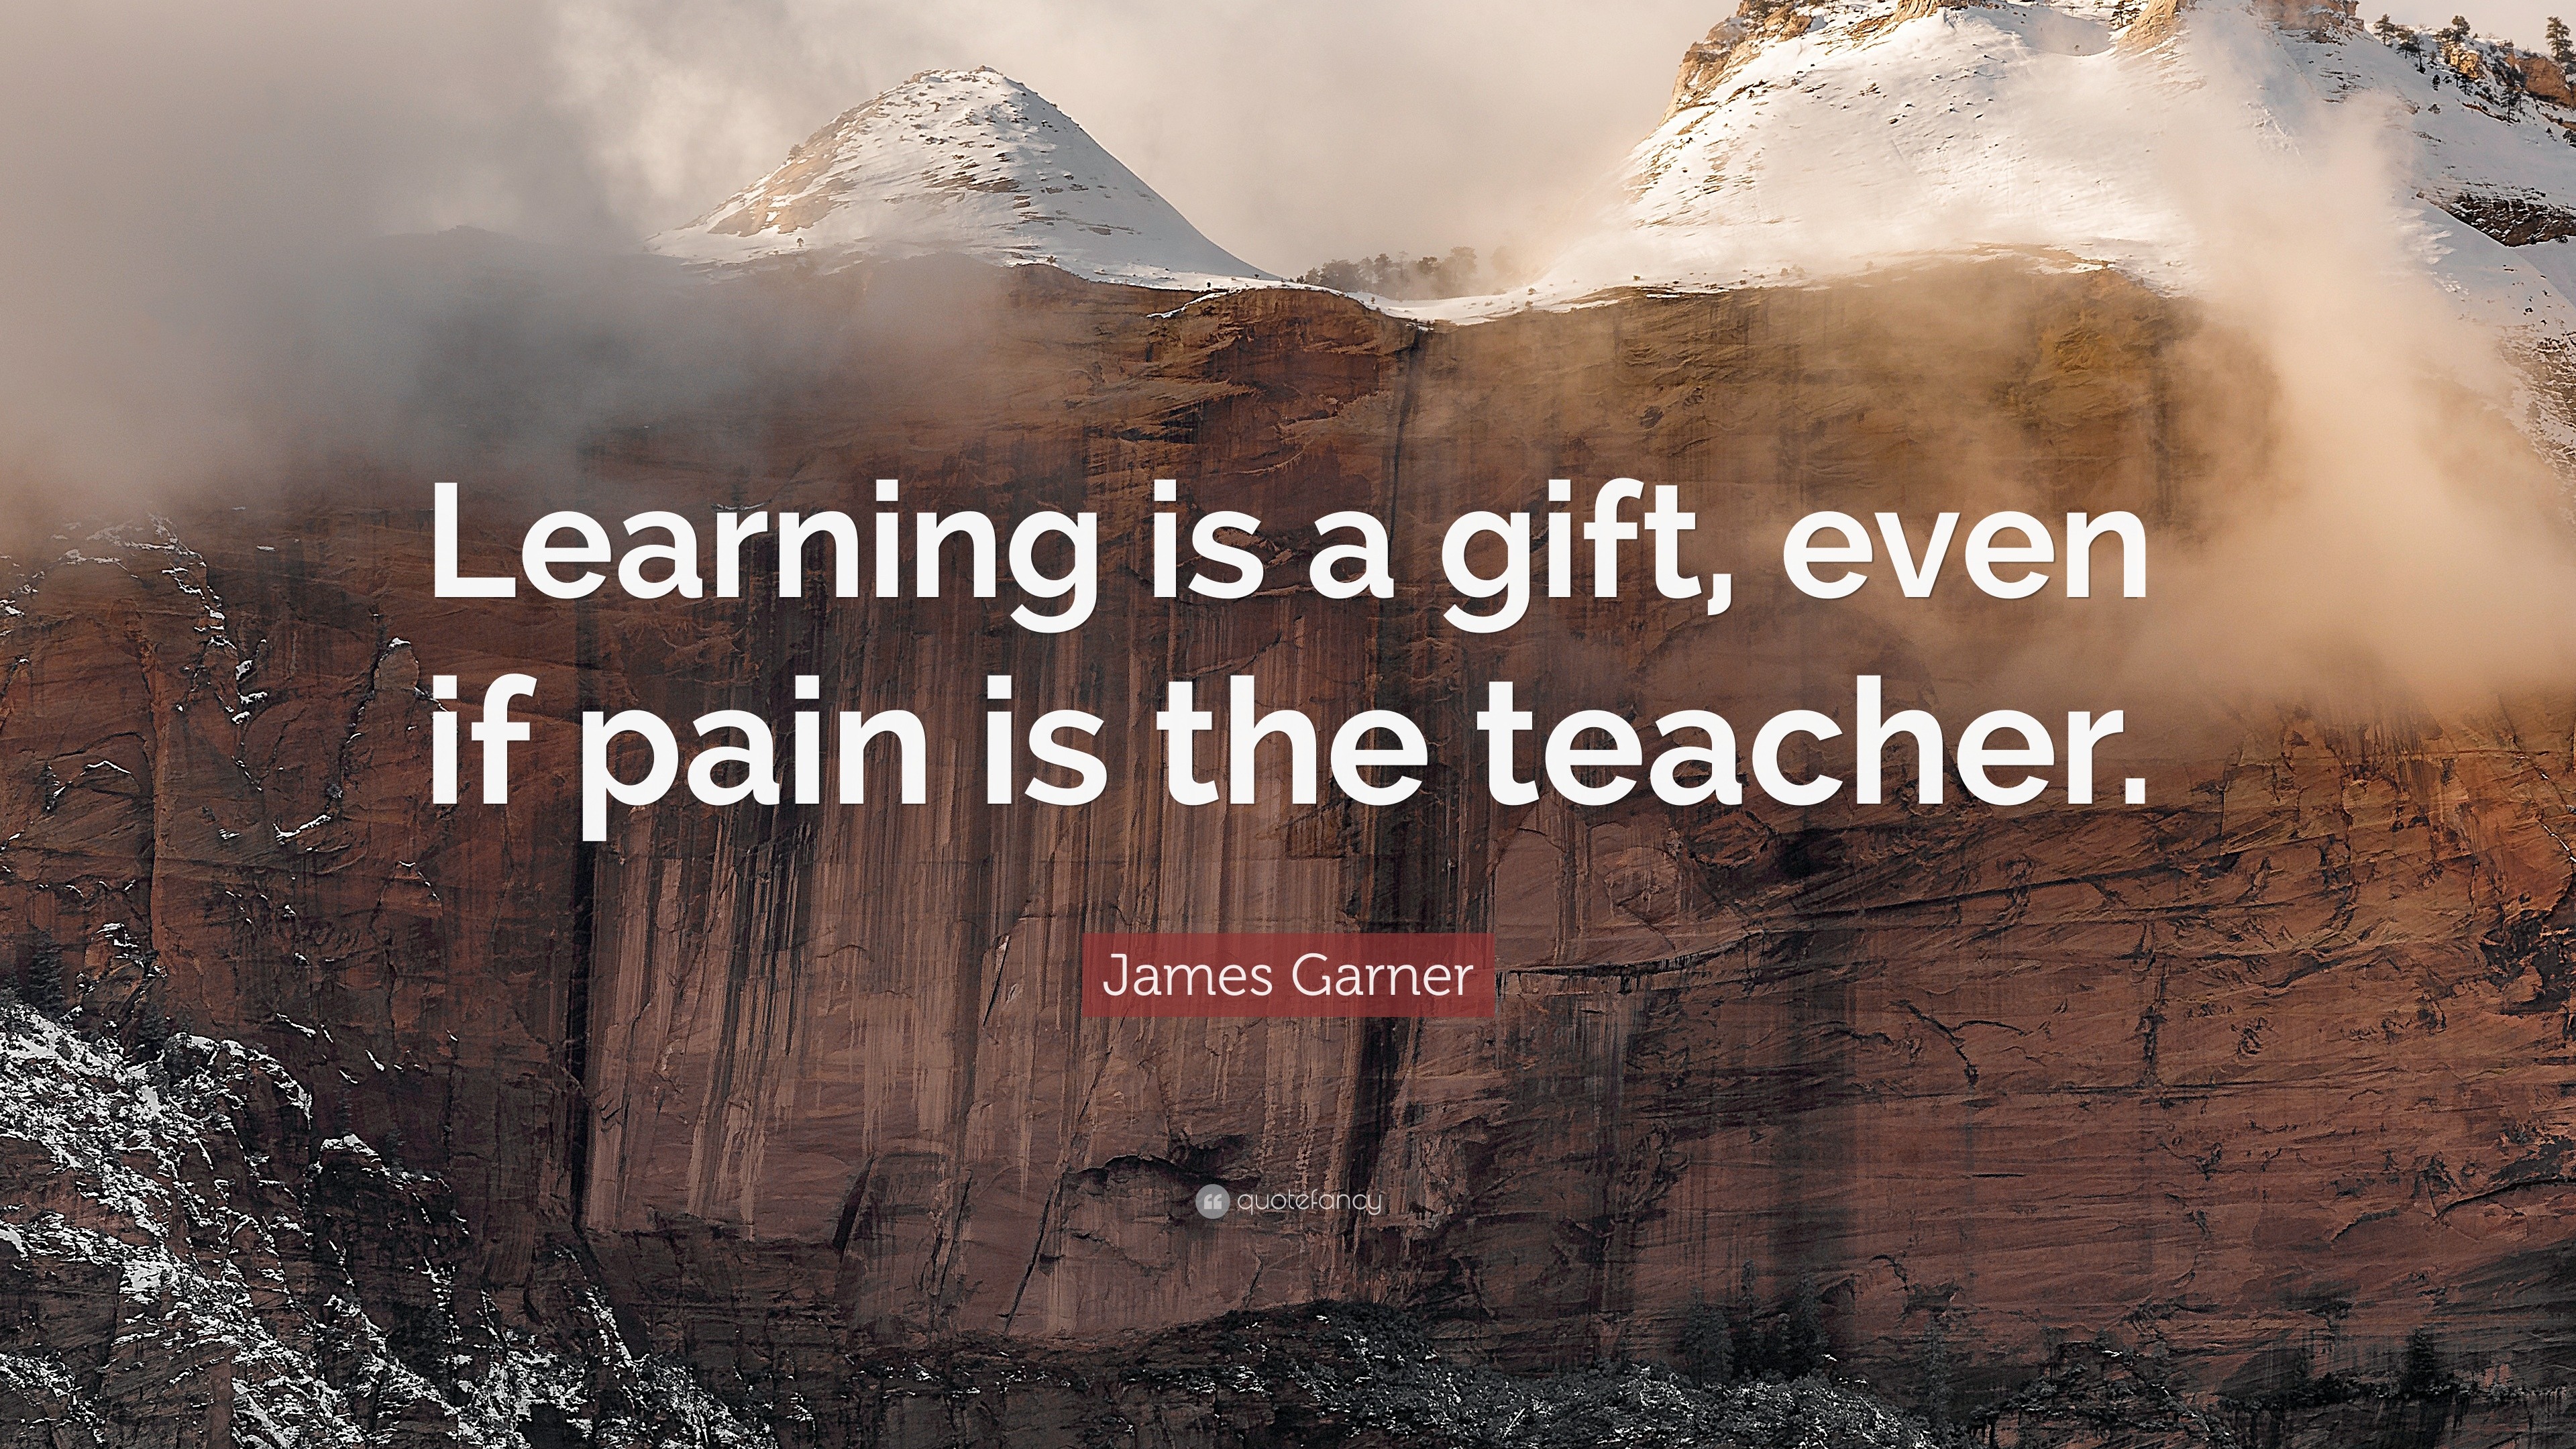 The Daily Life — #learning is a #gift when #pain is your #teacher..